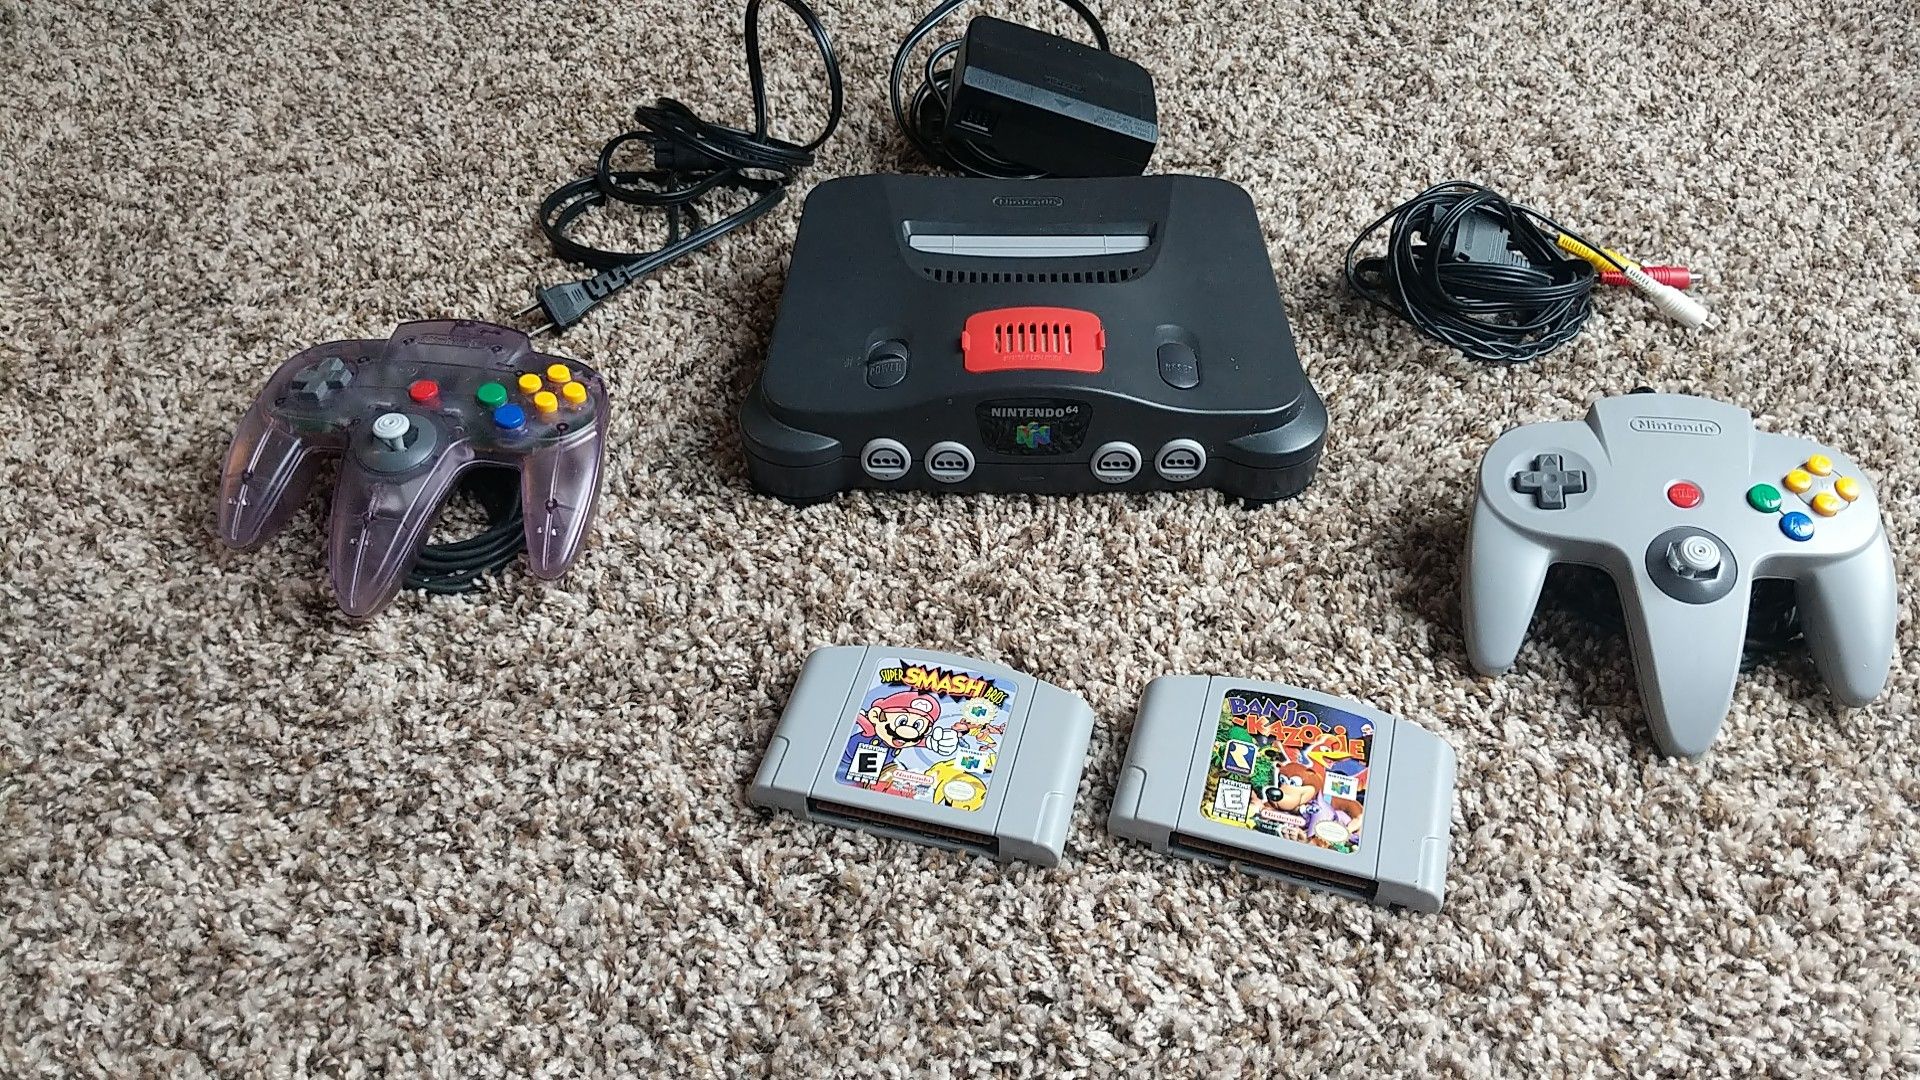 Nintendo 64 with games and controllers